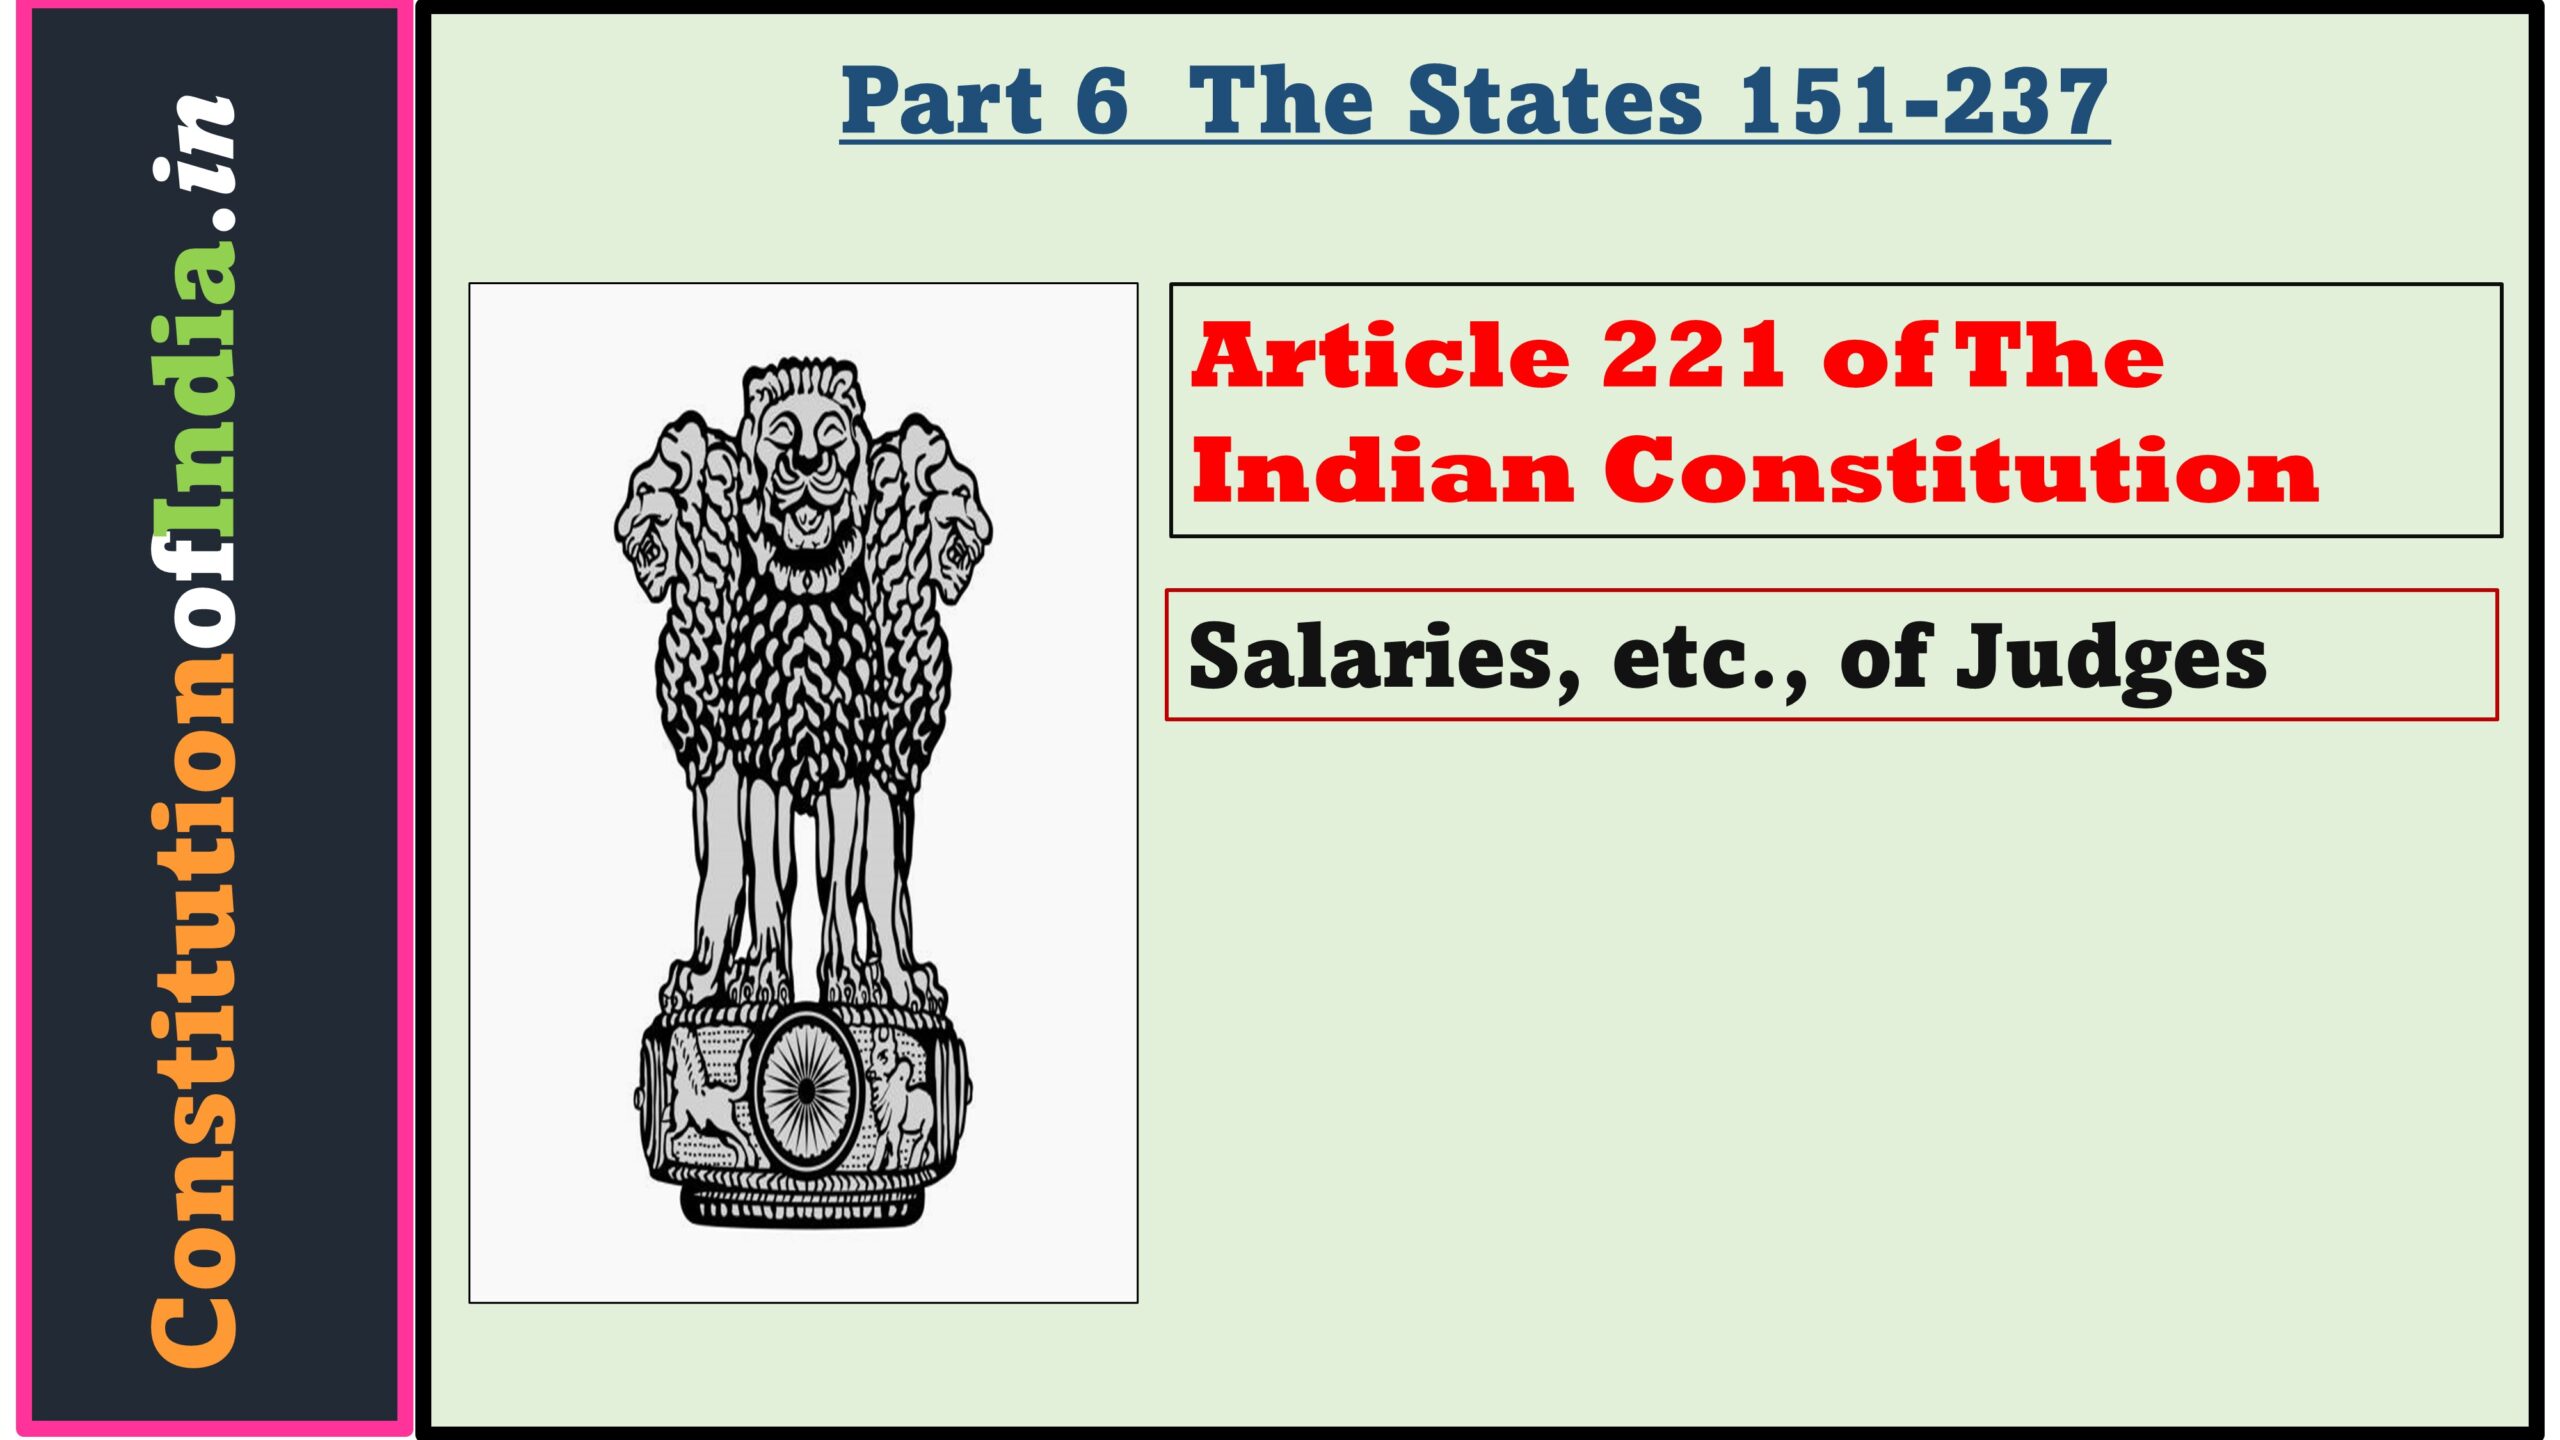 Article 221 of The Indian Constitution